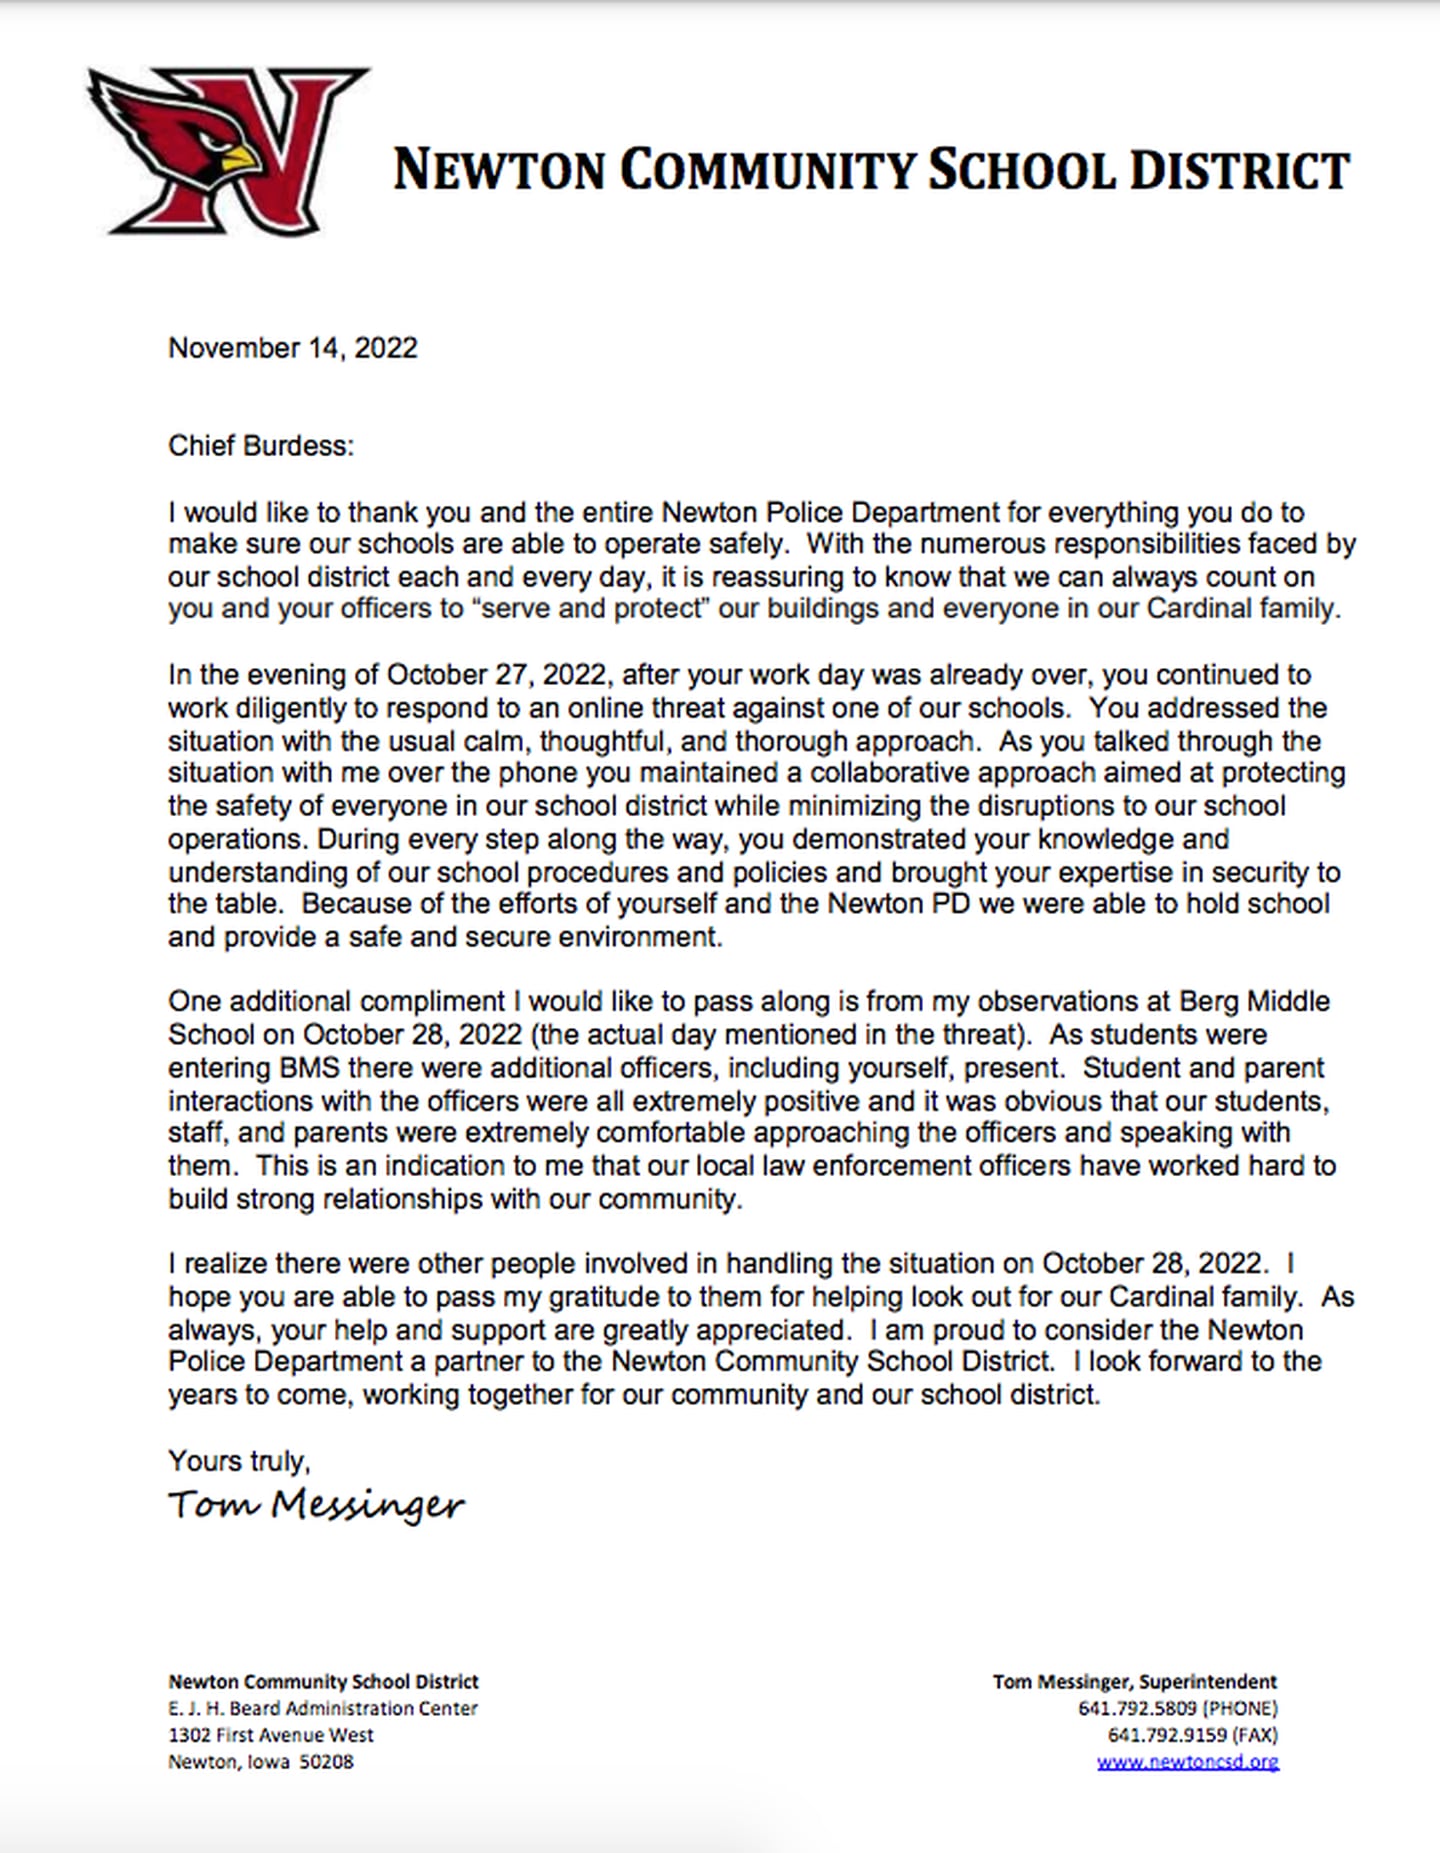 Newton Superintendent Tom Messinger sent a letter to Newton Police Chief Rob Burdess on Nov. 15 praising his handling of the threat made against Berg Middle School in late October.